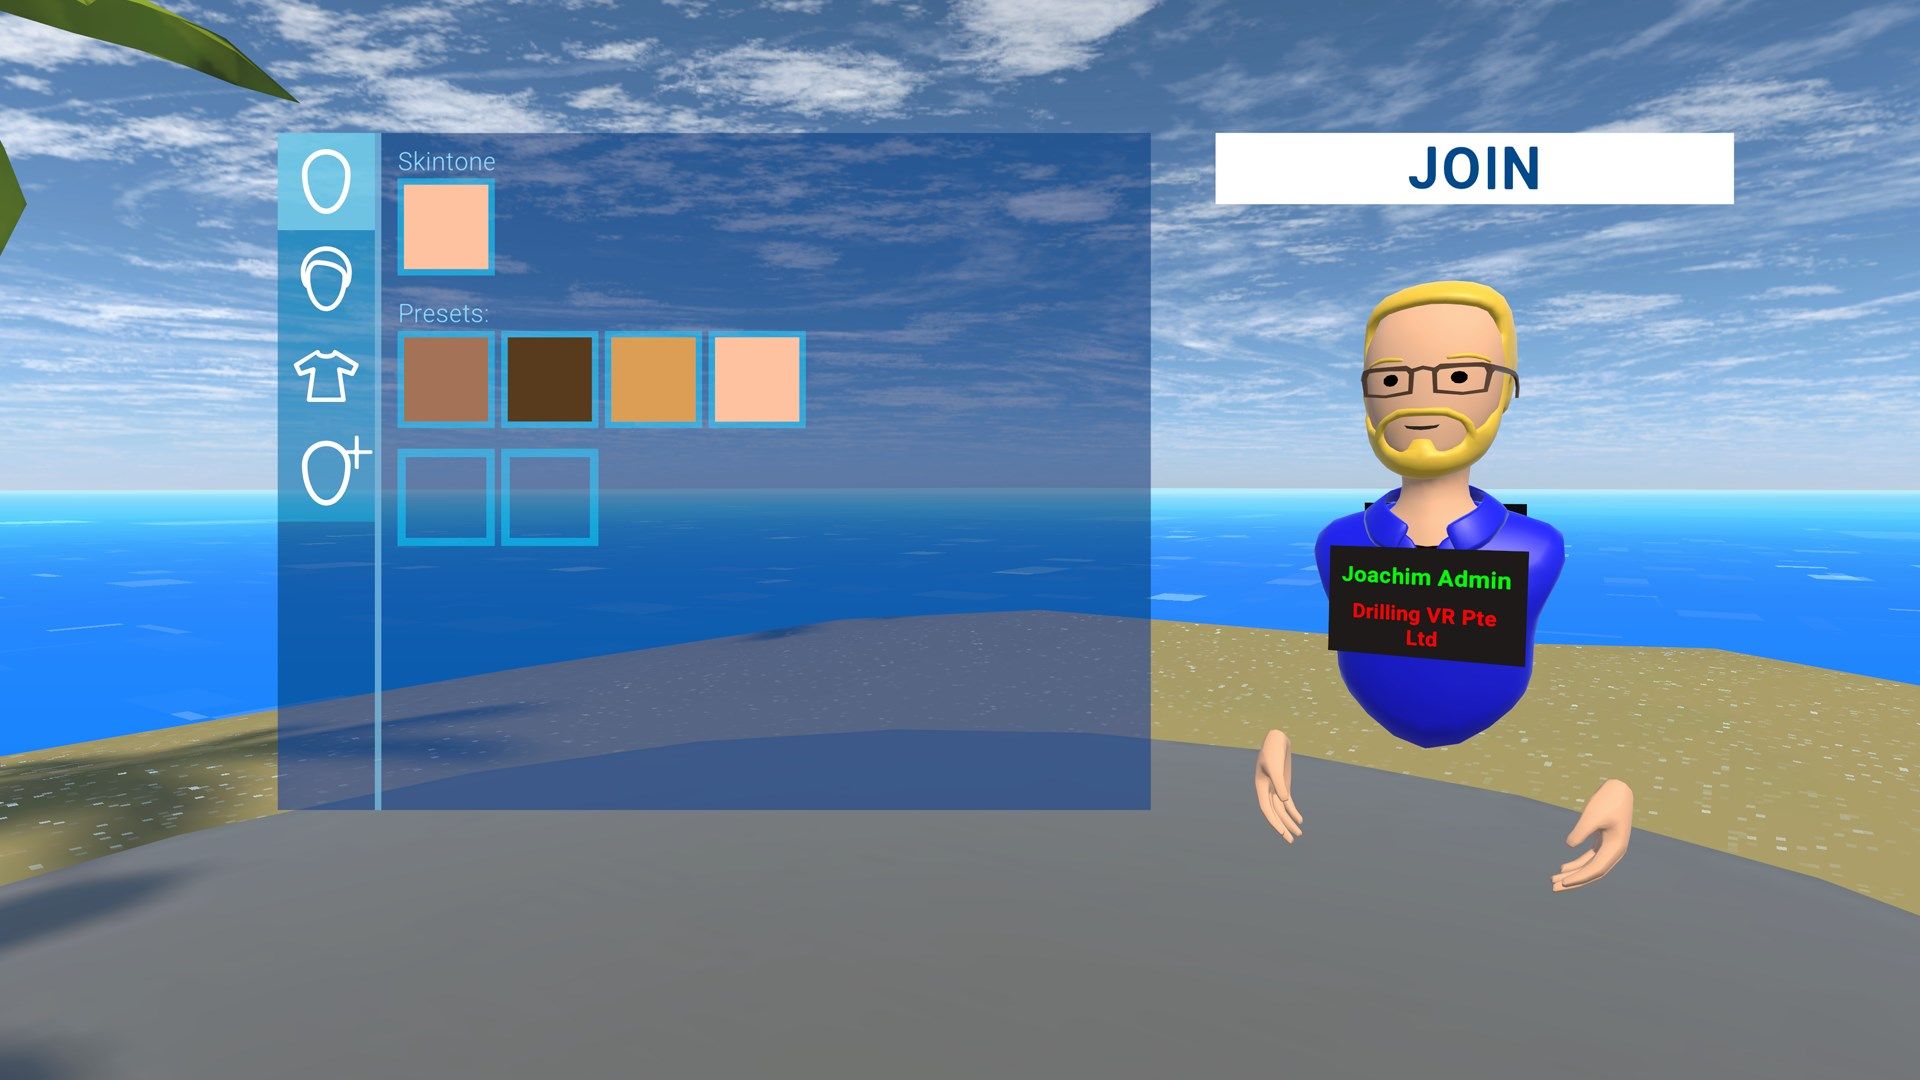 Use an customizable avatar to navigate the environment